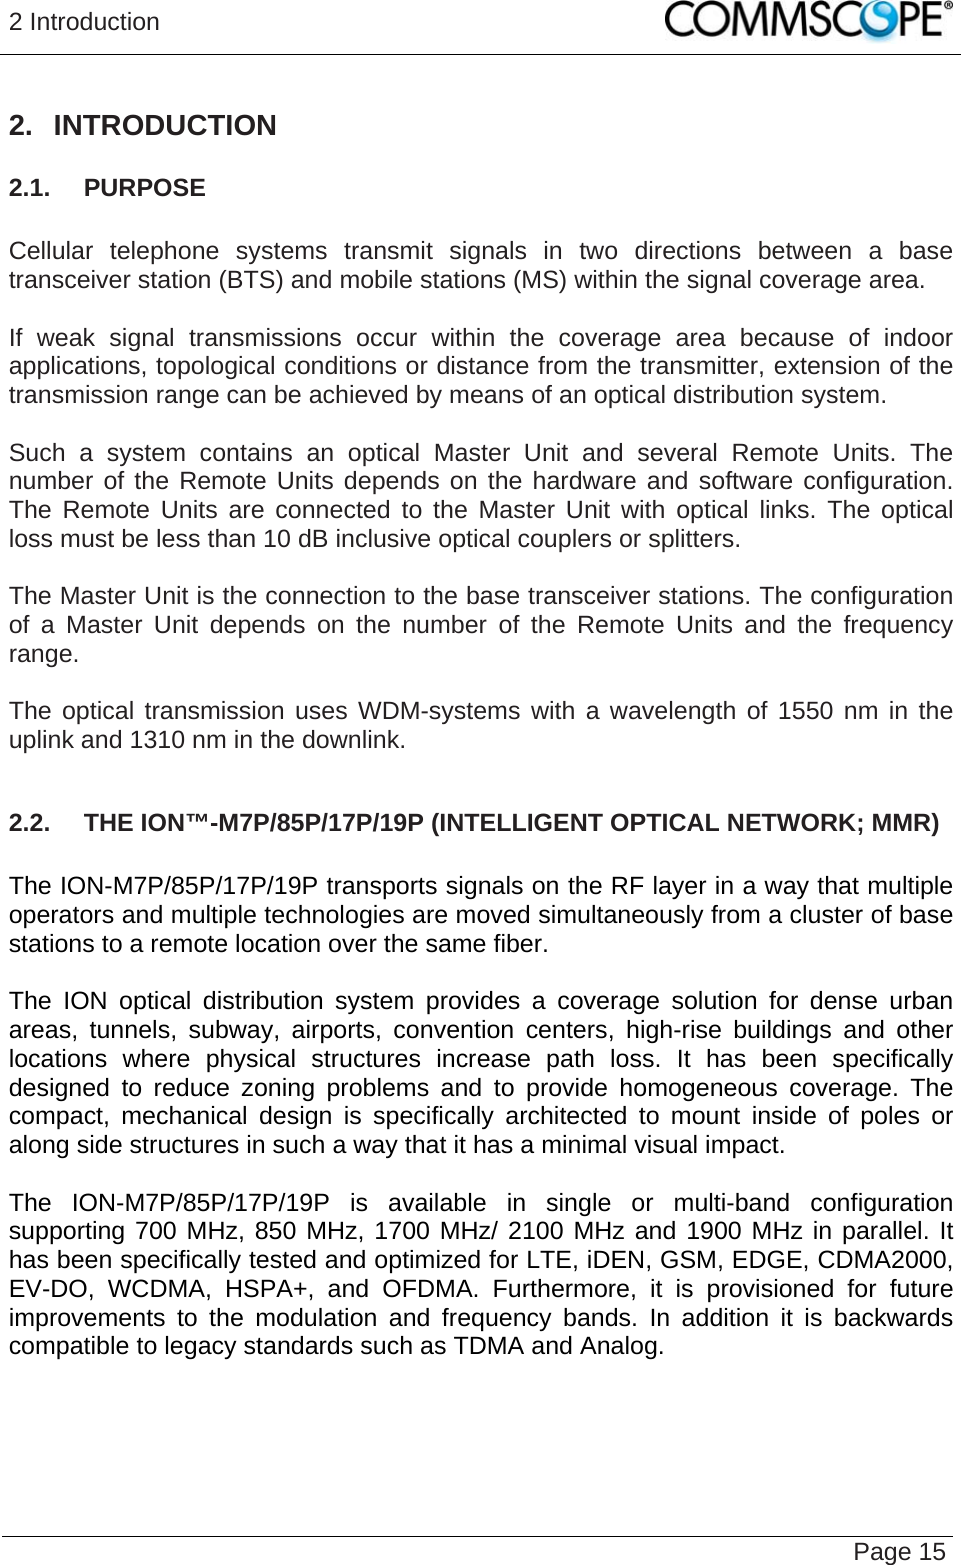 2 Introduction   Page 15 2. INTRODUCTION 2.1.  PURPOSE  Cellular telephone systems transmit signals in two directions between a base transceiver station (BTS) and mobile stations (MS) within the signal coverage area.  If weak signal transmissions occur within the coverage area because of indoor applications, topological conditions or distance from the transmitter, extension of the transmission range can be achieved by means of an optical distribution system.  Such a system contains an optical Master Unit and several Remote Units. The number of the Remote Units depends on the hardware and software configuration. The Remote Units are connected to the Master Unit with optical links. The optical loss must be less than 10 dB inclusive optical couplers or splitters.  The Master Unit is the connection to the base transceiver stations. The configuration of a Master Unit depends on the number of the Remote Units and the frequency range.   The optical transmission uses WDM-systems with a wavelength of 1550 nm in the uplink and 1310 nm in the downlink.  2.2.  THE ION™-M7P/85P/17P/19P (INTELLIGENT OPTICAL NETWORK; MMR)  The ION-M7P/85P/17P/19P transports signals on the RF layer in a way that multiple operators and multiple technologies are moved simultaneously from a cluster of base stations to a remote location over the same fiber.  The ION optical distribution system provides a coverage solution for dense urban areas, tunnels, subway, airports, convention centers, high-rise buildings and other locations where physical structures increase path loss. It has been specifically designed to reduce zoning problems and to provide homogeneous coverage. The compact, mechanical design is specifically architected to mount inside of poles or along side structures in such a way that it has a minimal visual impact.  The ION-M7P/85P/17P/19P is available in single or multi-band configuration supporting 700 MHz, 850 MHz, 1700 MHz/ 2100 MHz and 1900 MHz in parallel. It has been specifically tested and optimized for LTE, iDEN, GSM, EDGE, CDMA2000, EV-DO, WCDMA, HSPA+, and OFDMA. Furthermore, it is provisioned for future improvements to the modulation and frequency bands. In addition it is backwards compatible to legacy standards such as TDMA and Analog.   